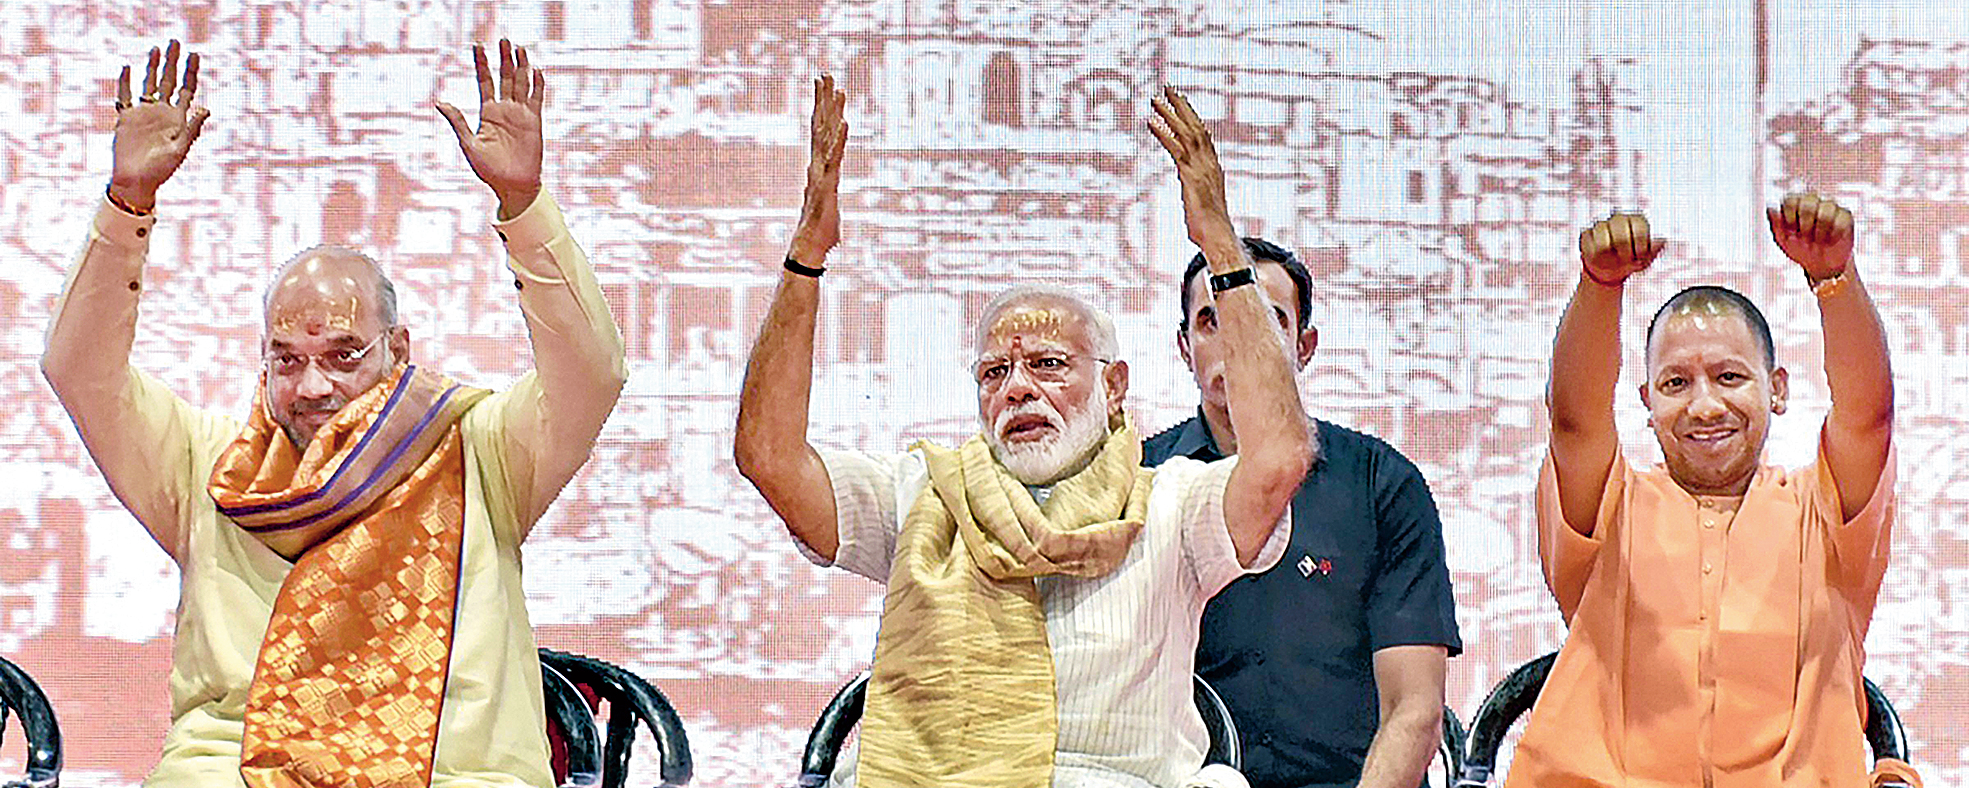 Prime Minister-elect Narendra Modi, BJP chief Amit Shah and Uttar Pradesh chief minister Yogi Adityanath during a meeting with BJP workers in Varanasi on Monday.